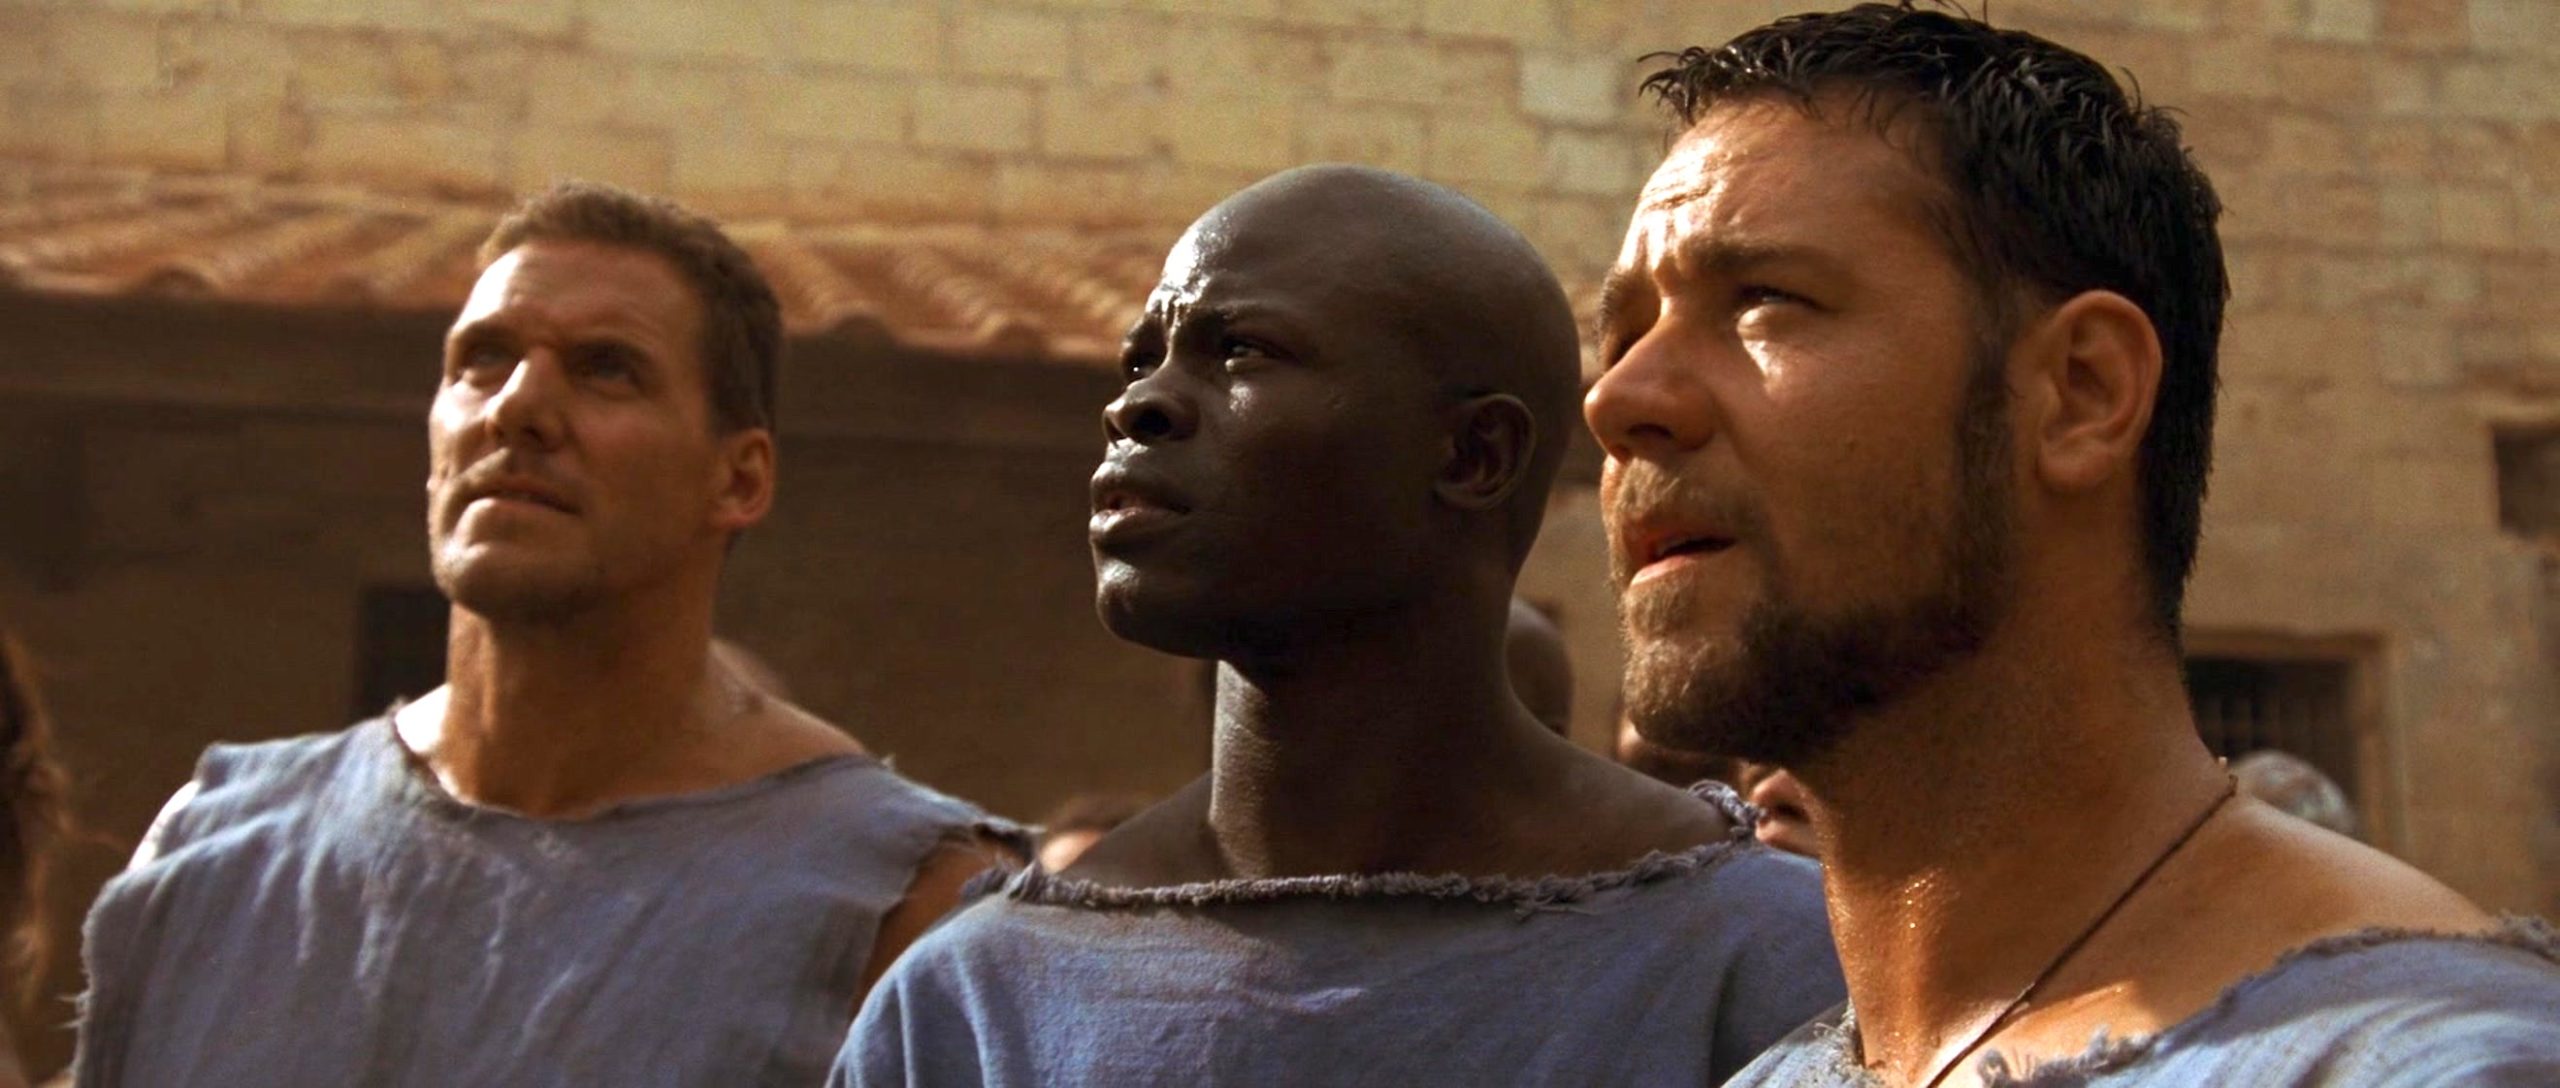 Ralf Moeller, Djimon Hounsou, and Russell Crowe in Gladiator